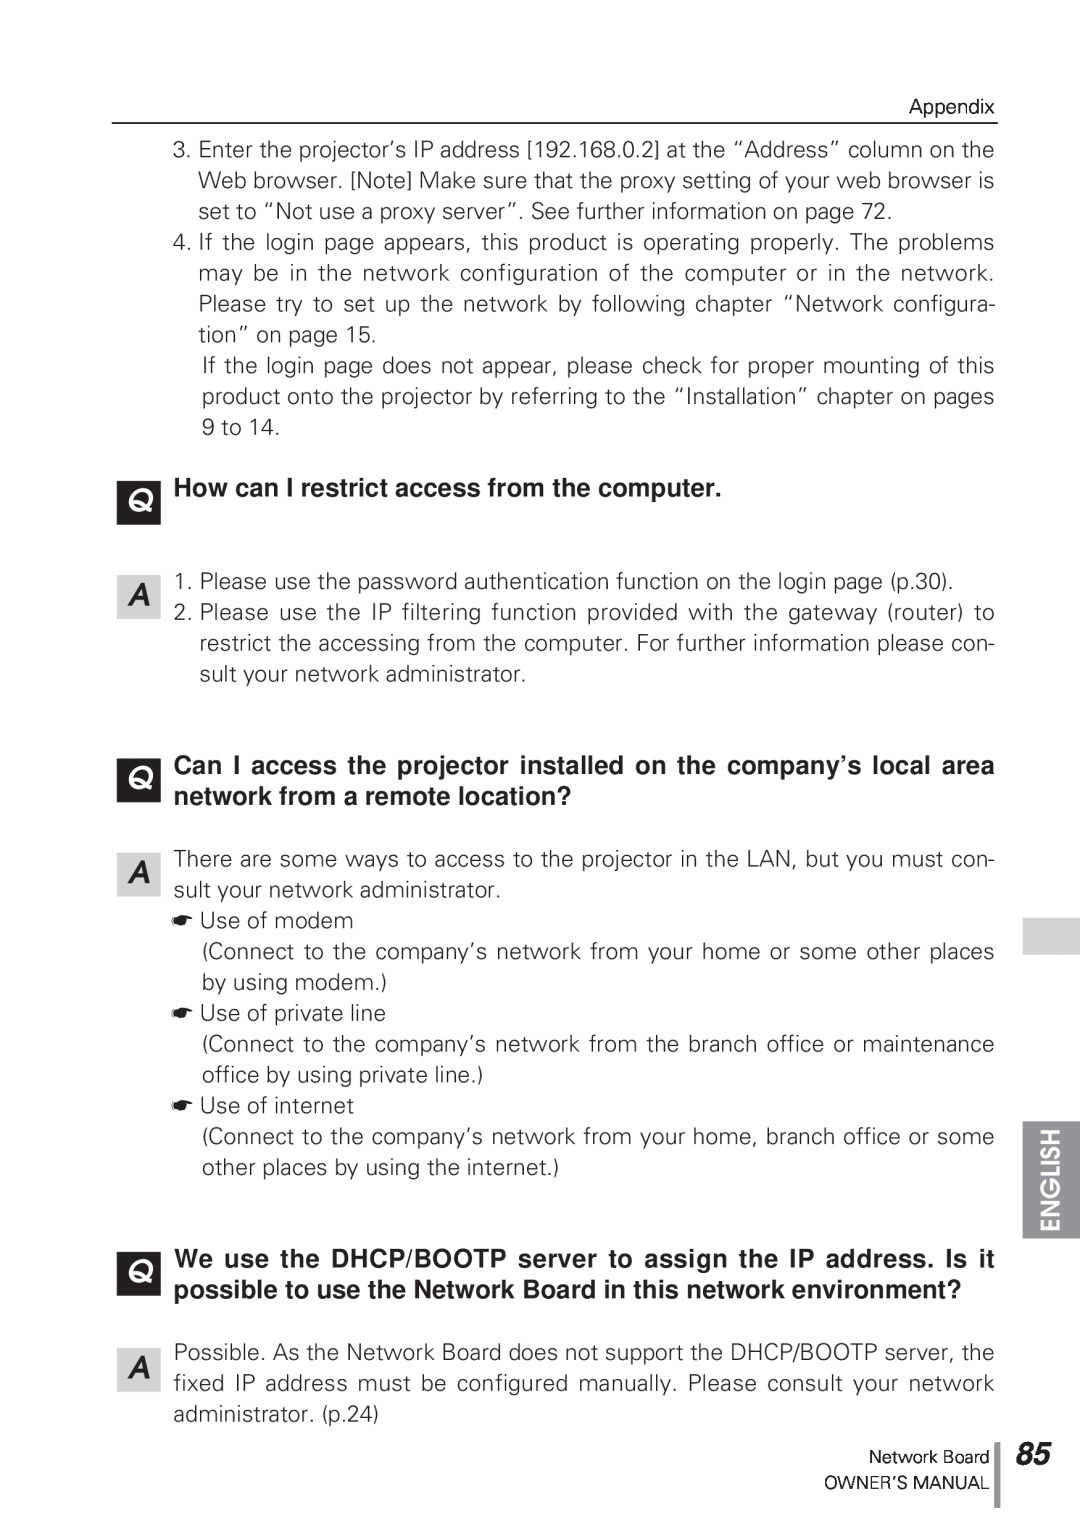 Eiki MD13NET owner manual QHow can I restrict access from the computer, English 